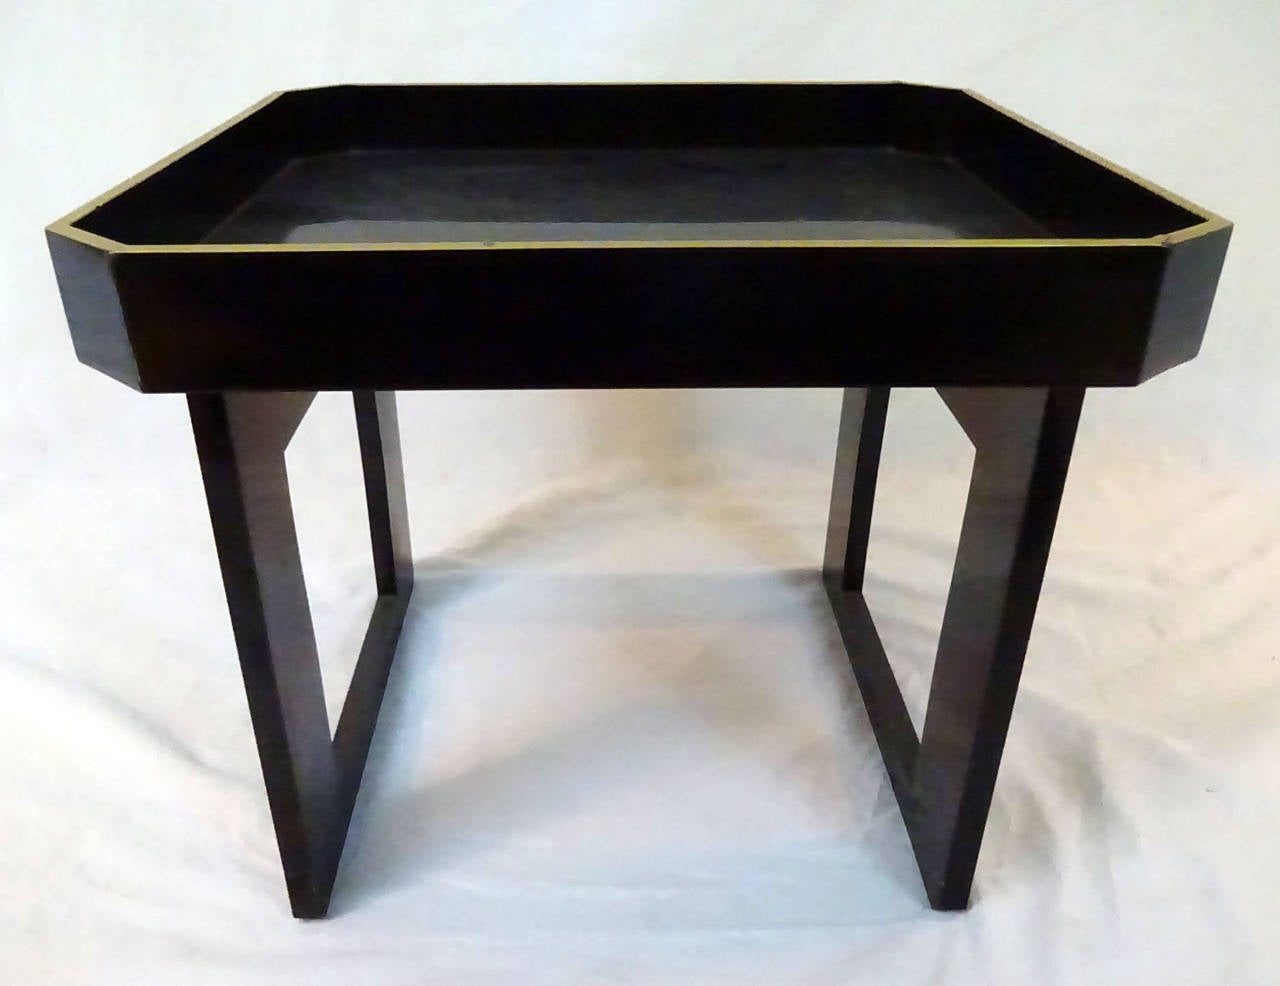 Early 20th Century Ebonized Lacquer Small Tray Table from the Orient For Sale 2